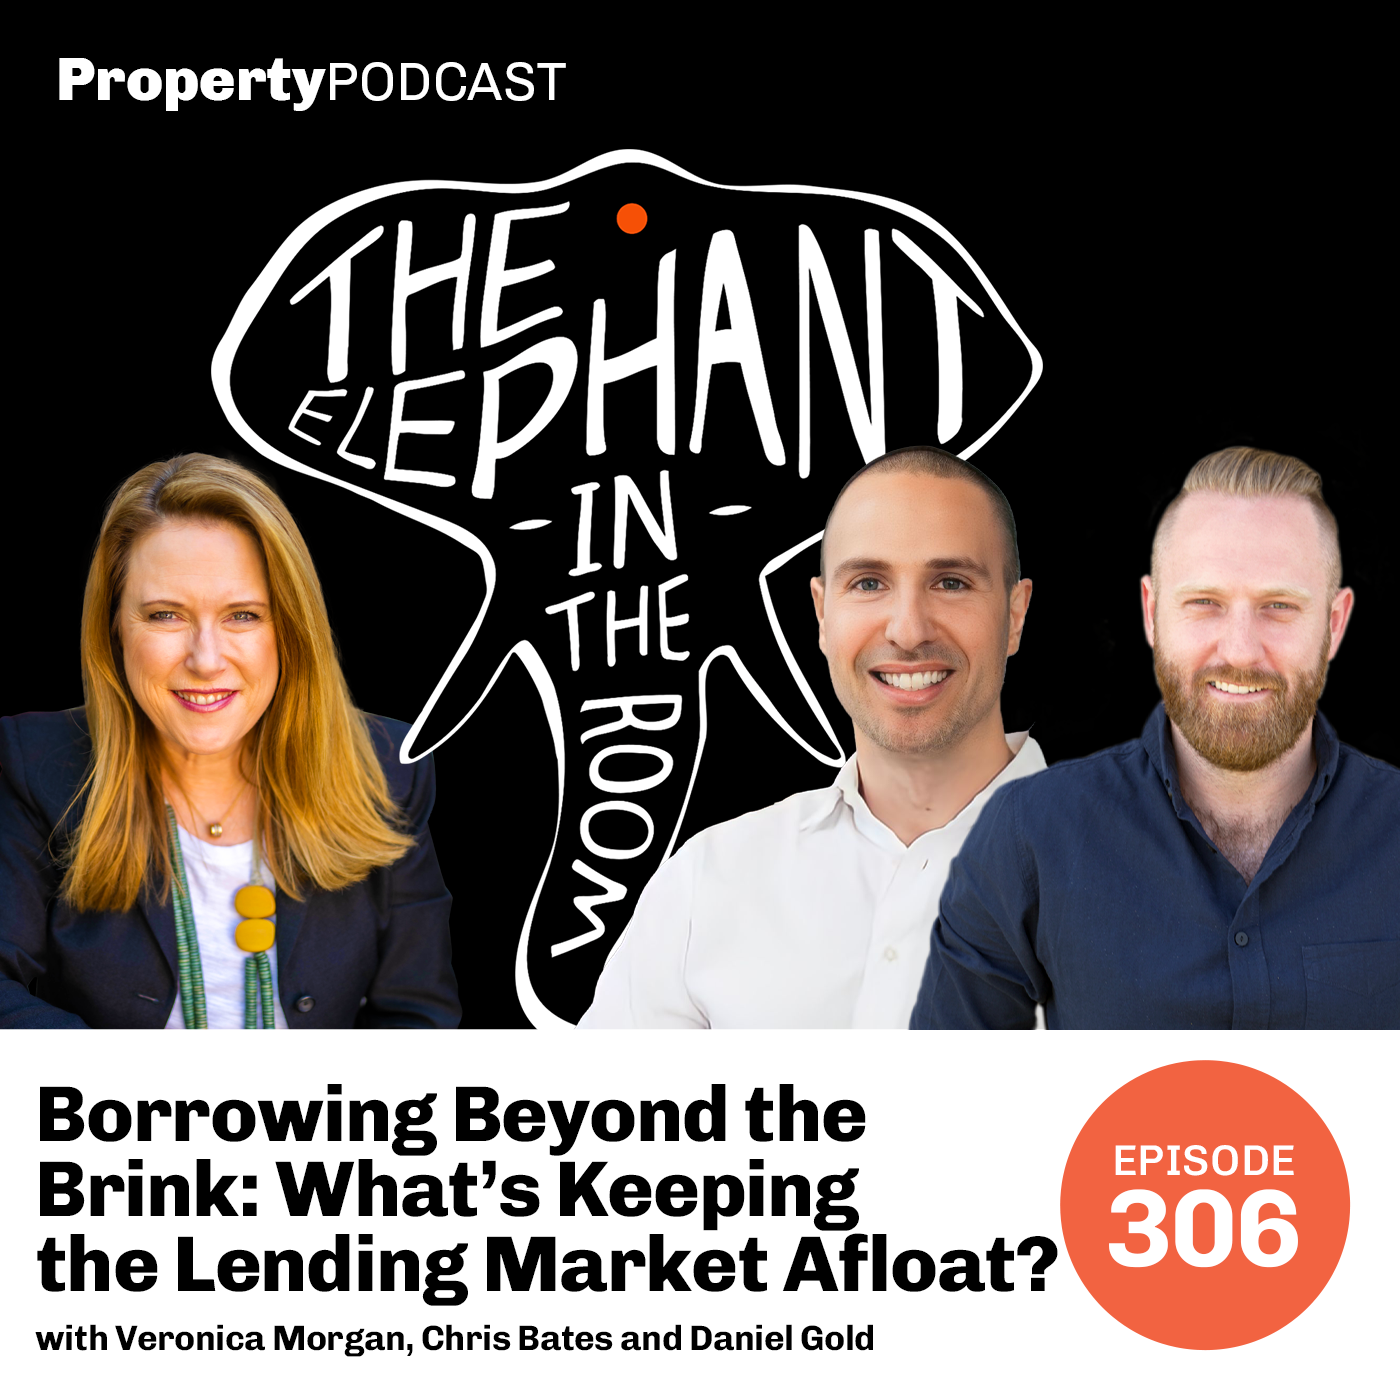 Borrowing Beyond the Brink: What’s Keeping the Lending Market Afloat?